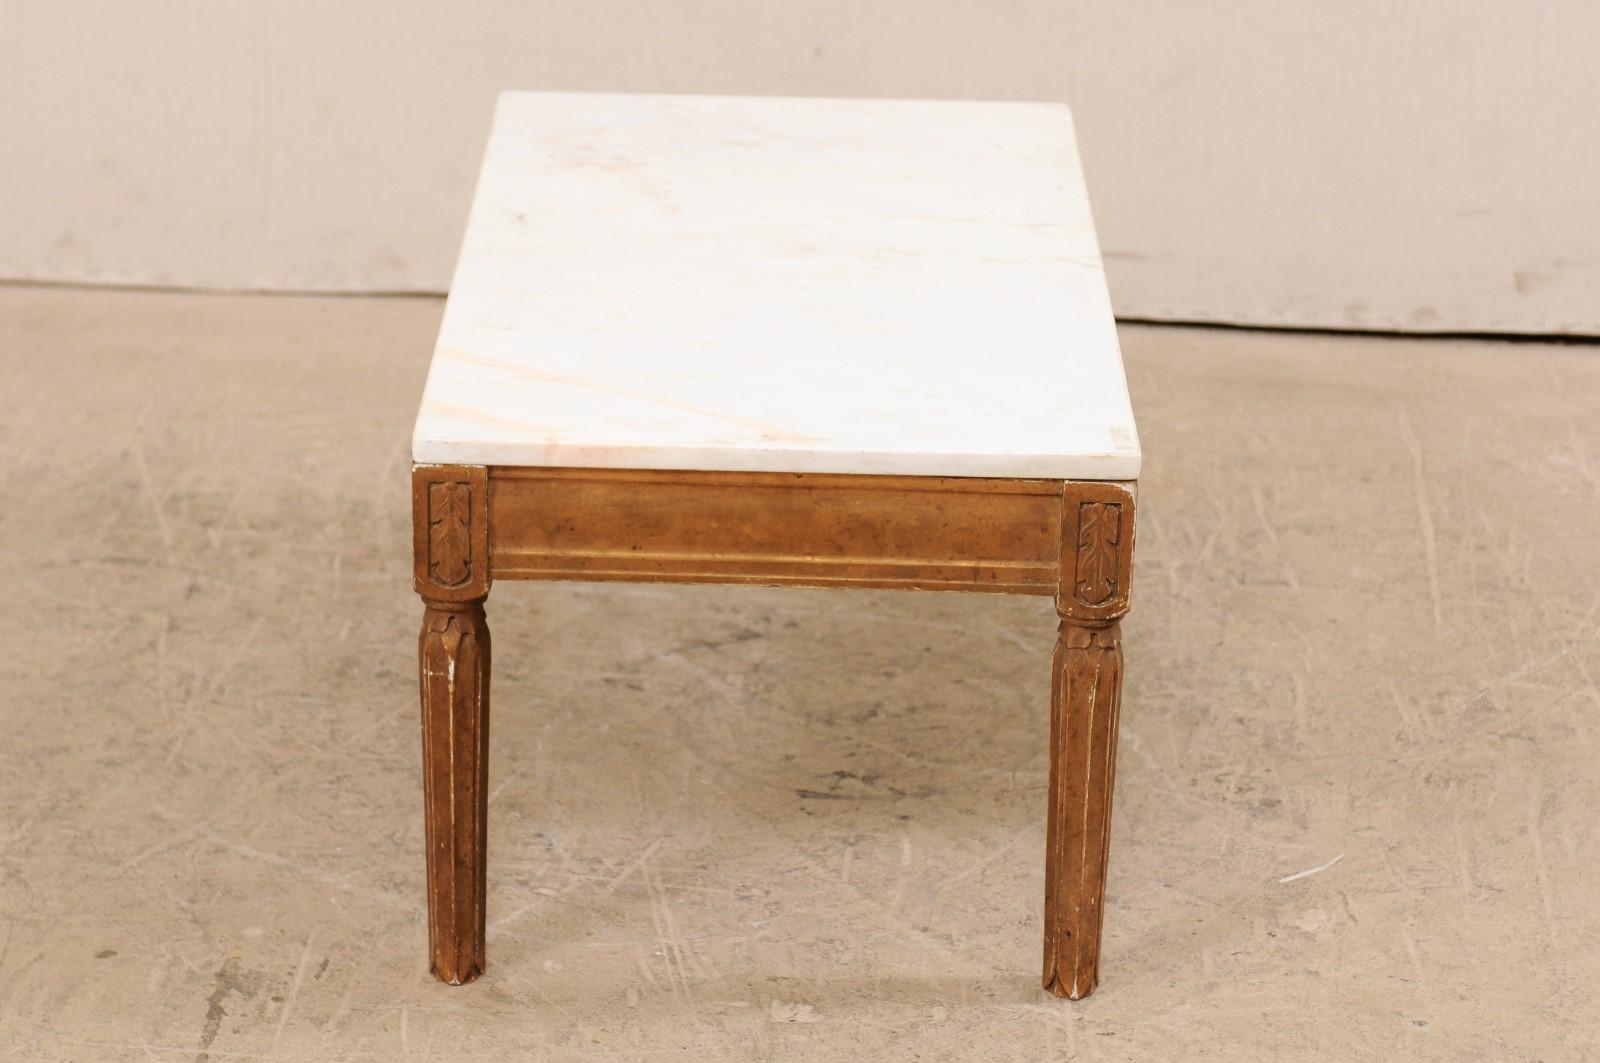 Antique Swedish Carved Wood Coffee Table with White Marble Top 1